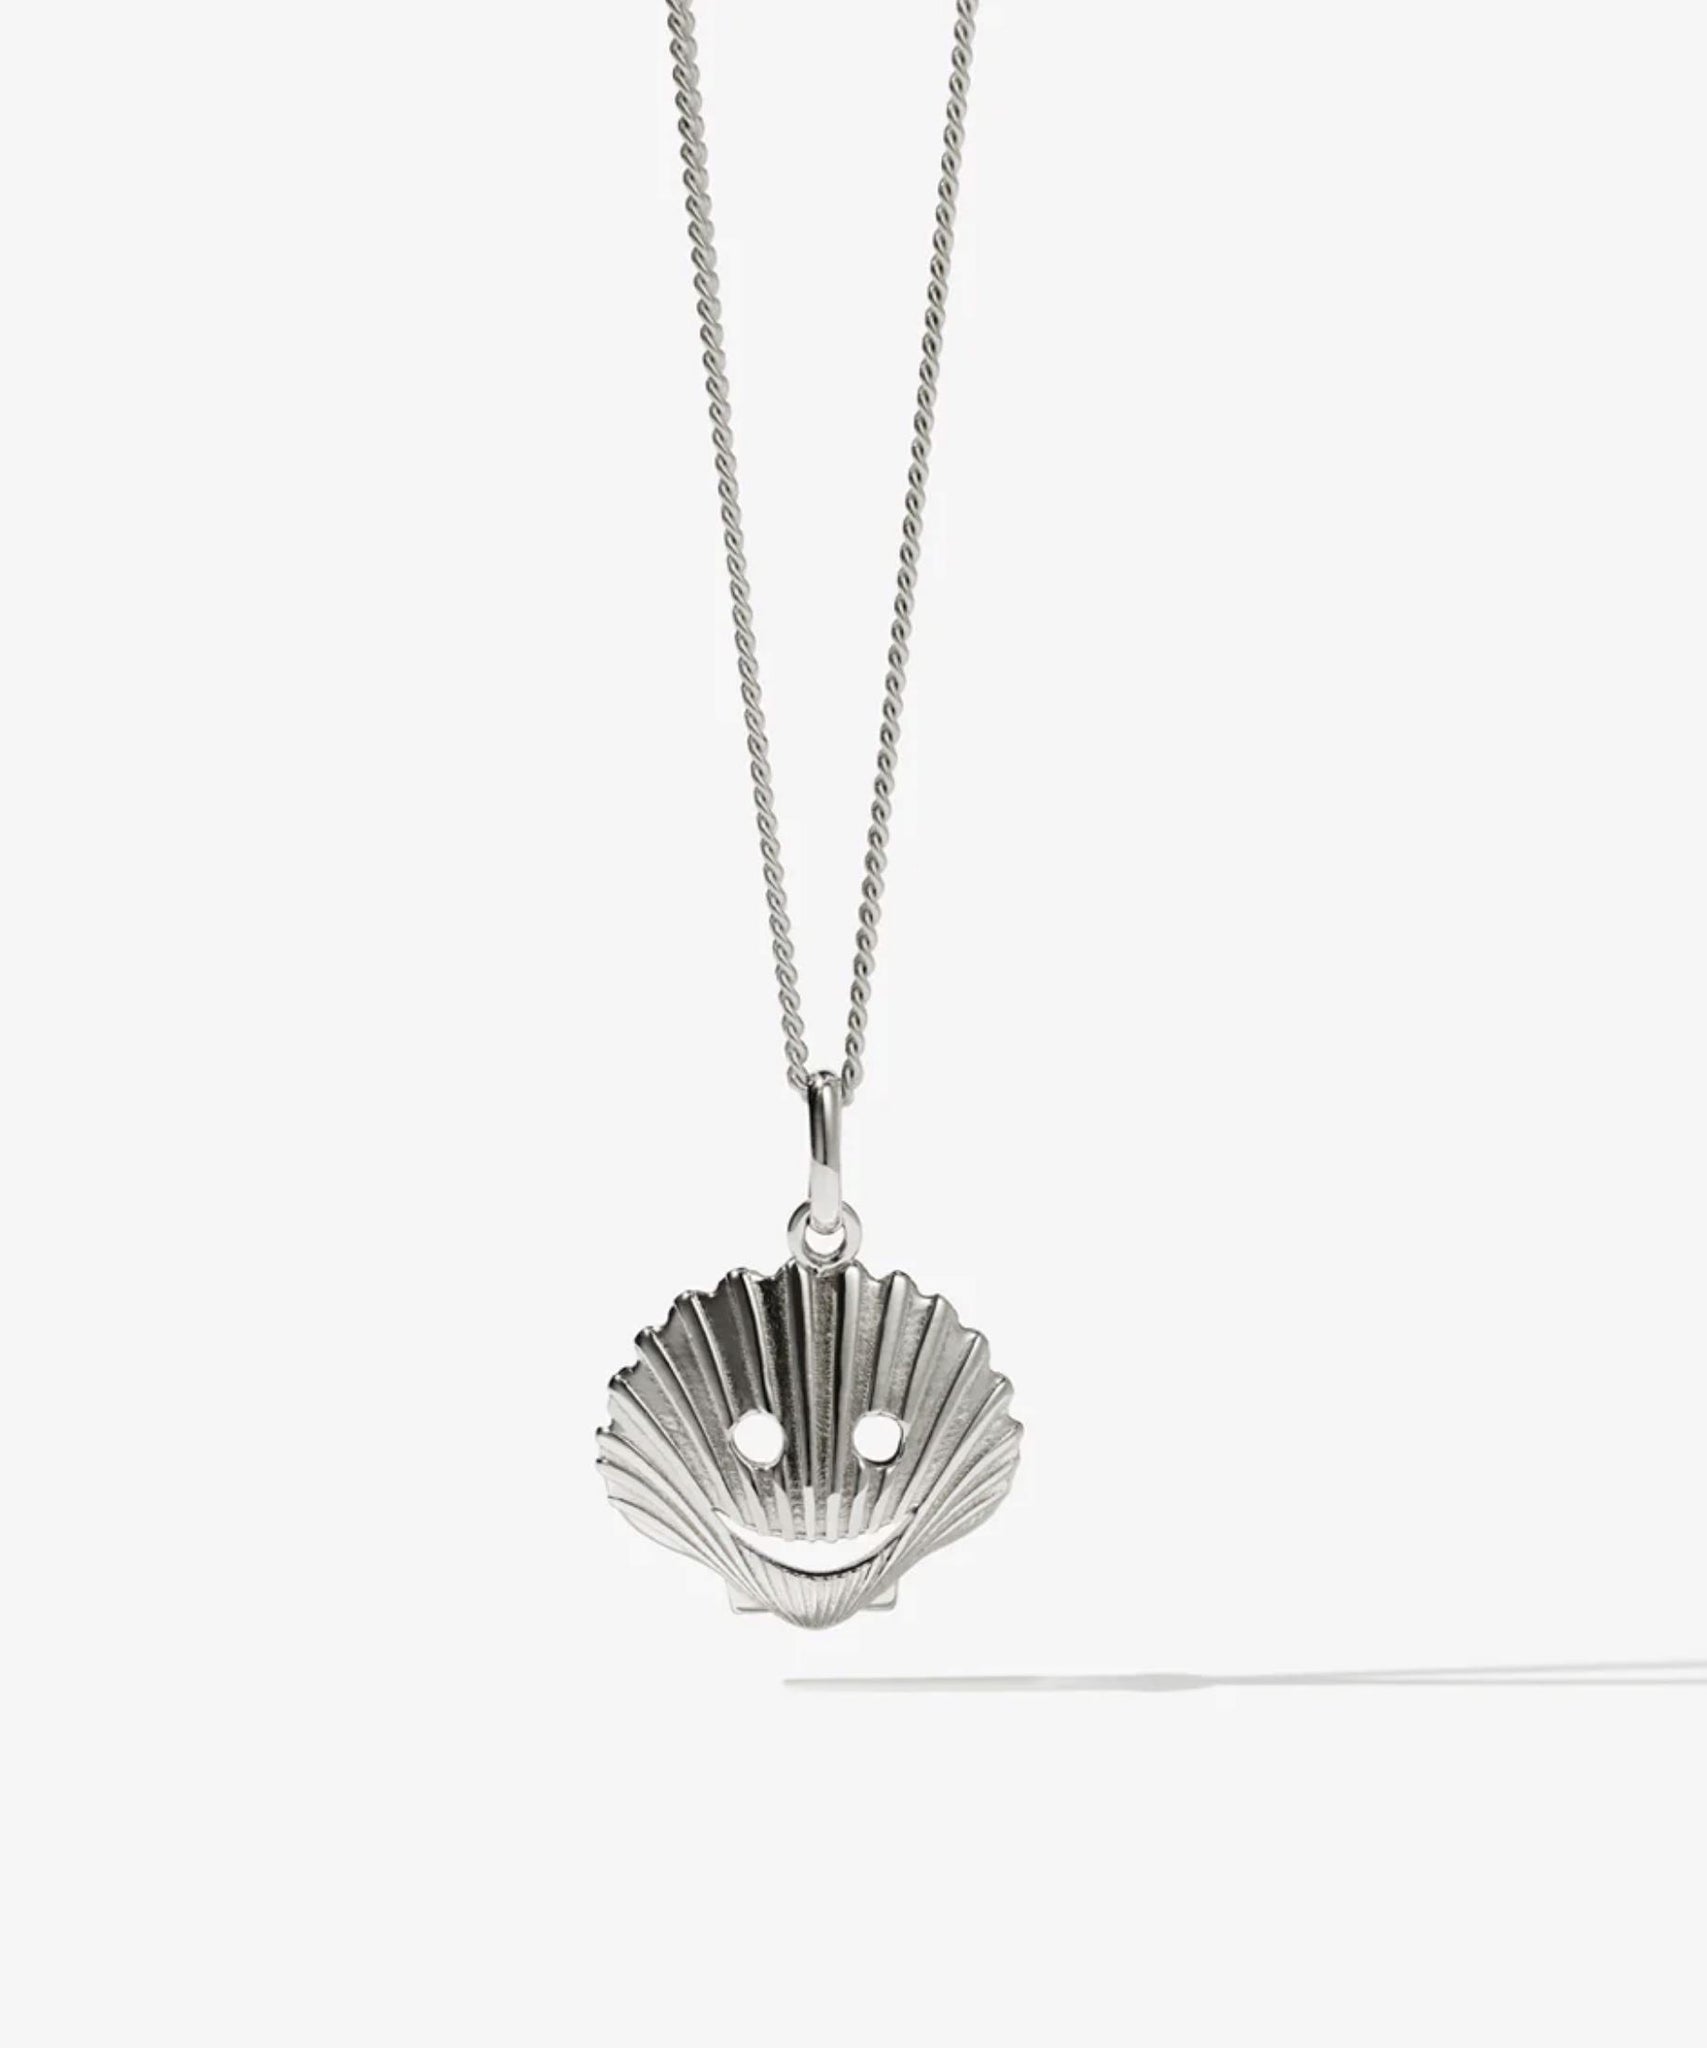 Nell x Meadowlark Shell Necklace Sterling Silver - Third Drawer Down